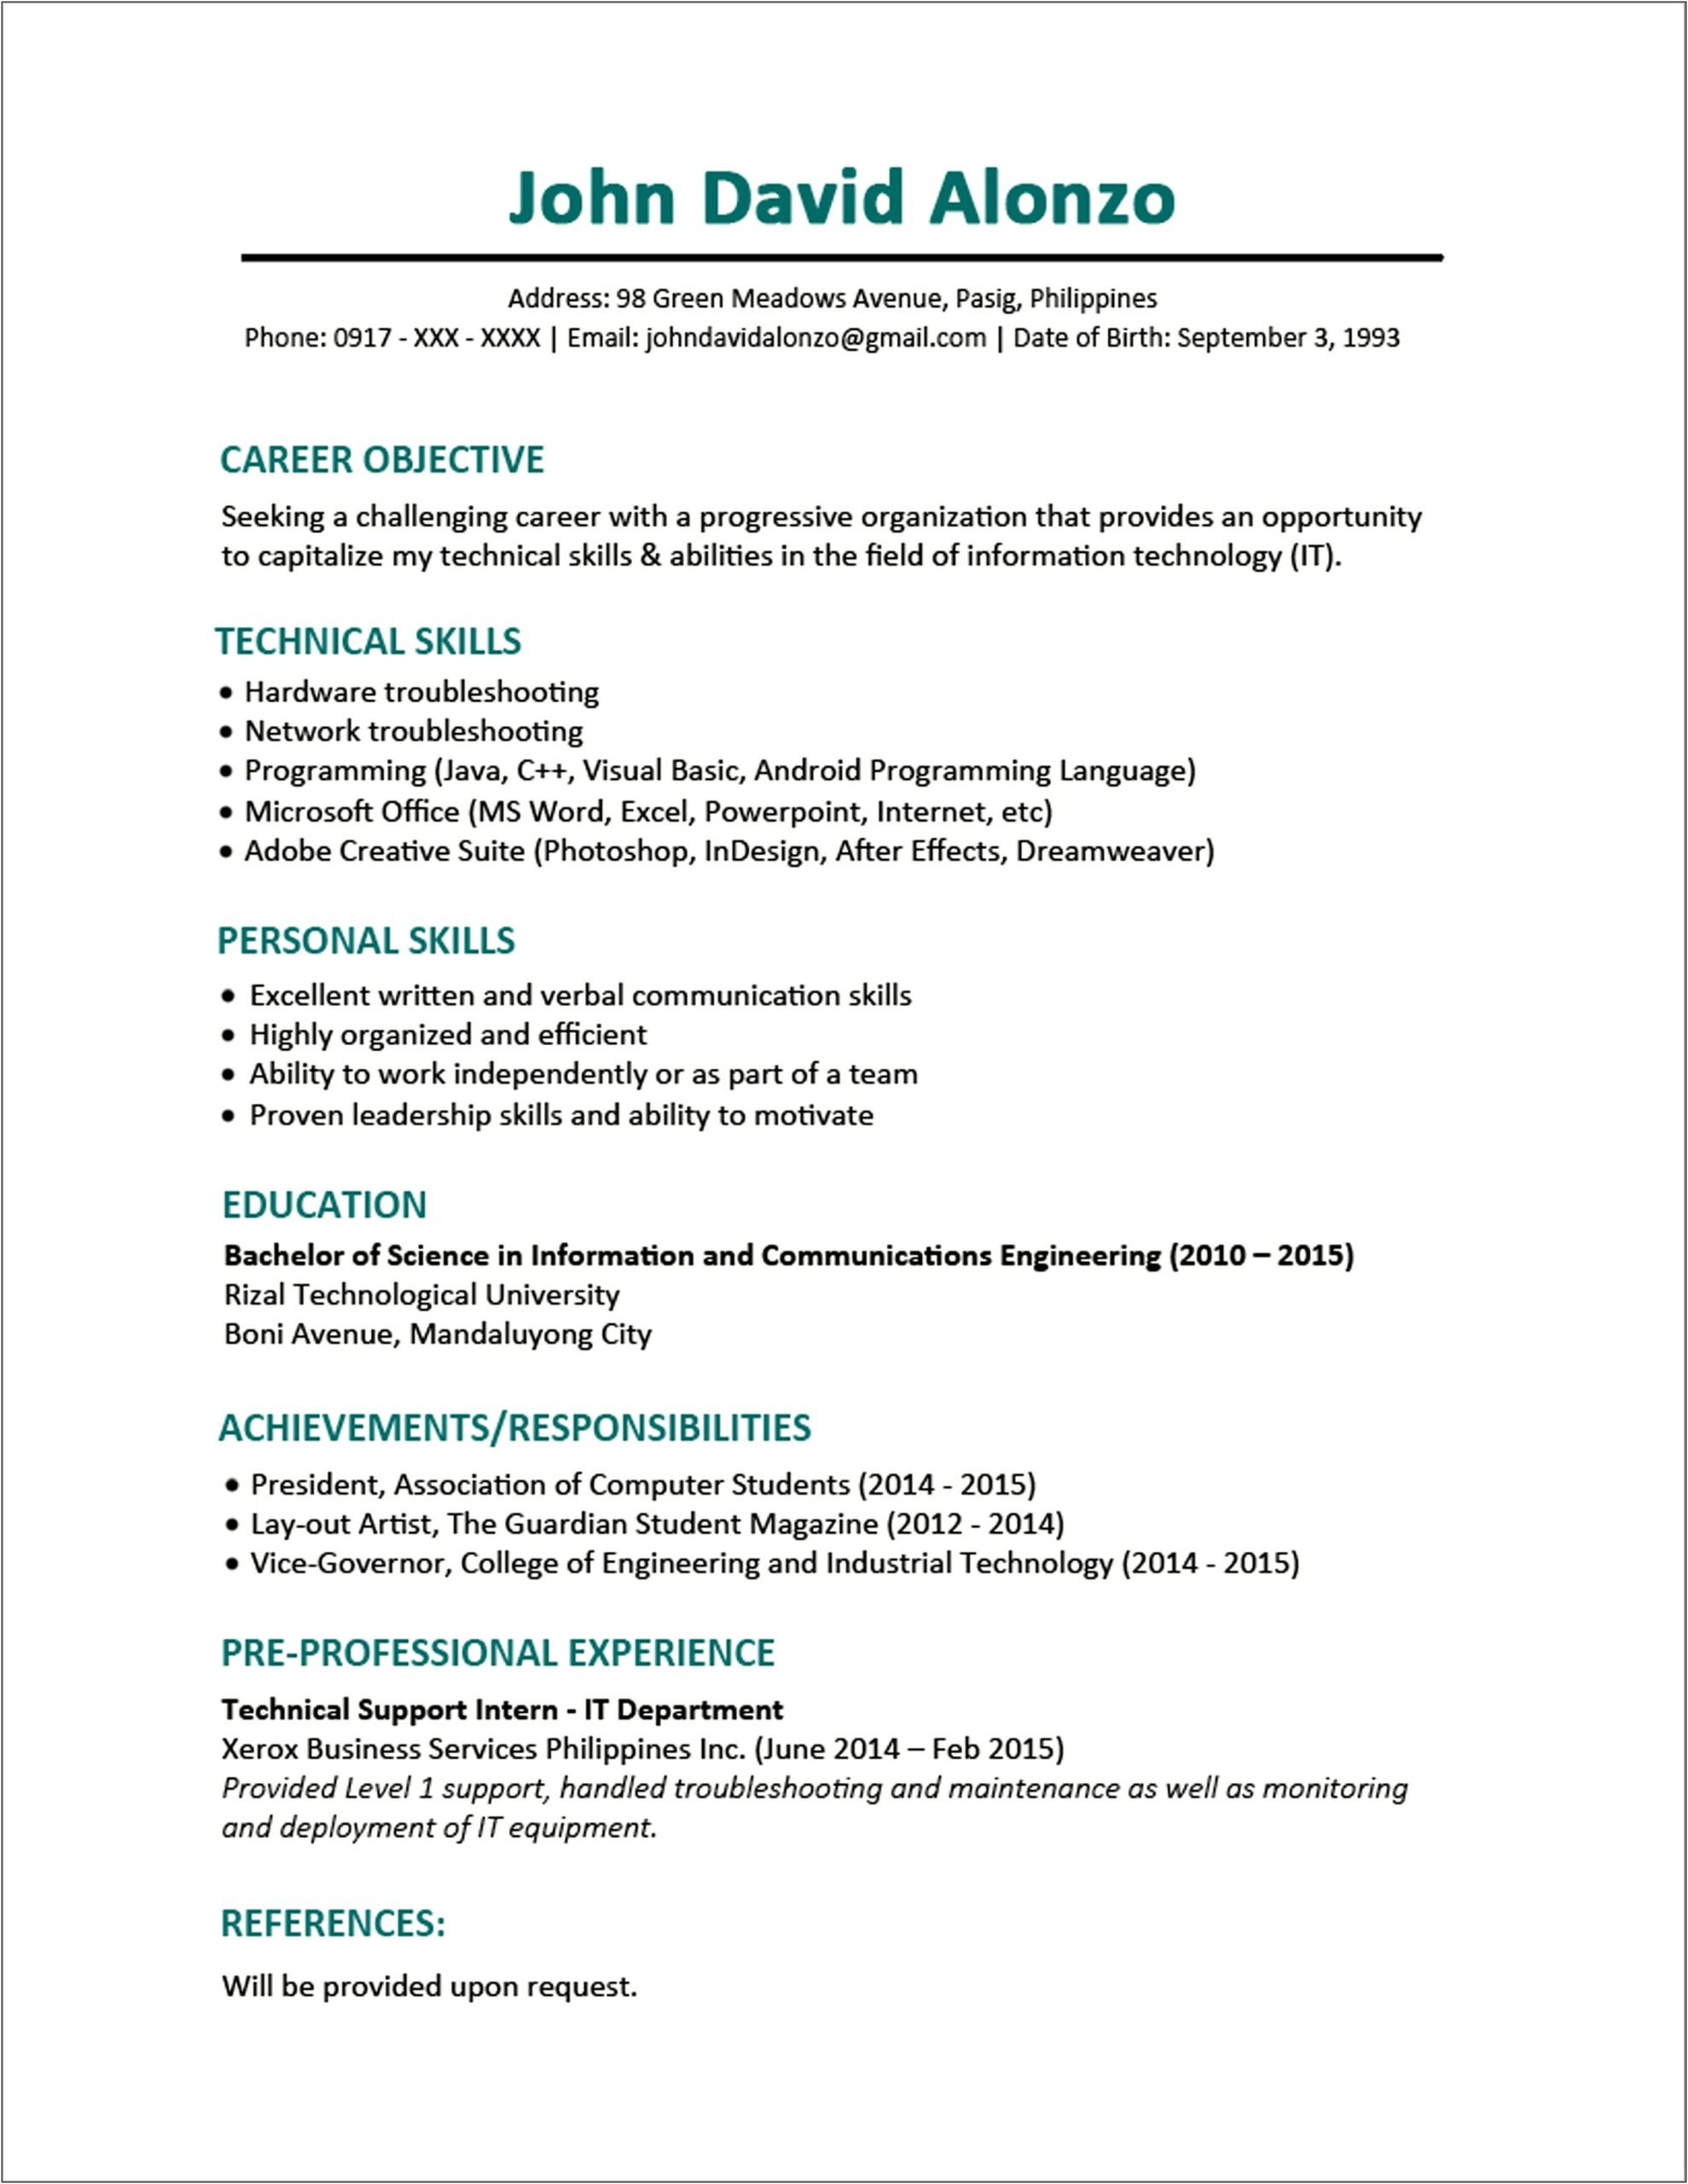 Resume Summary Samples For College Freshman